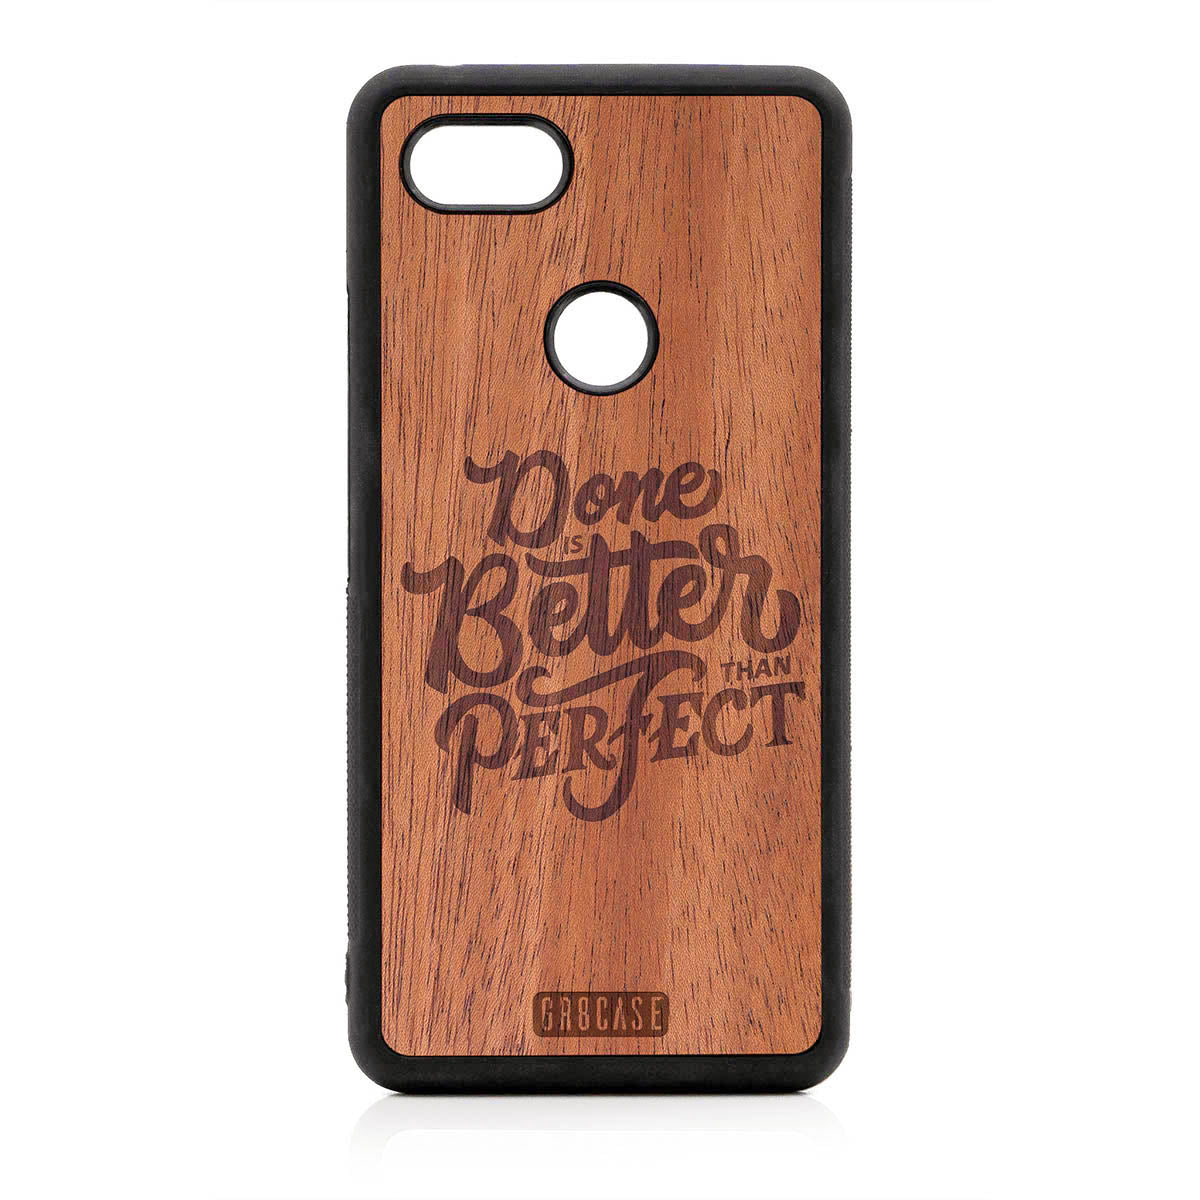 Done Is Better Than Perfect Design Wood Case For Google Pixel 3 XL by GR8CASE